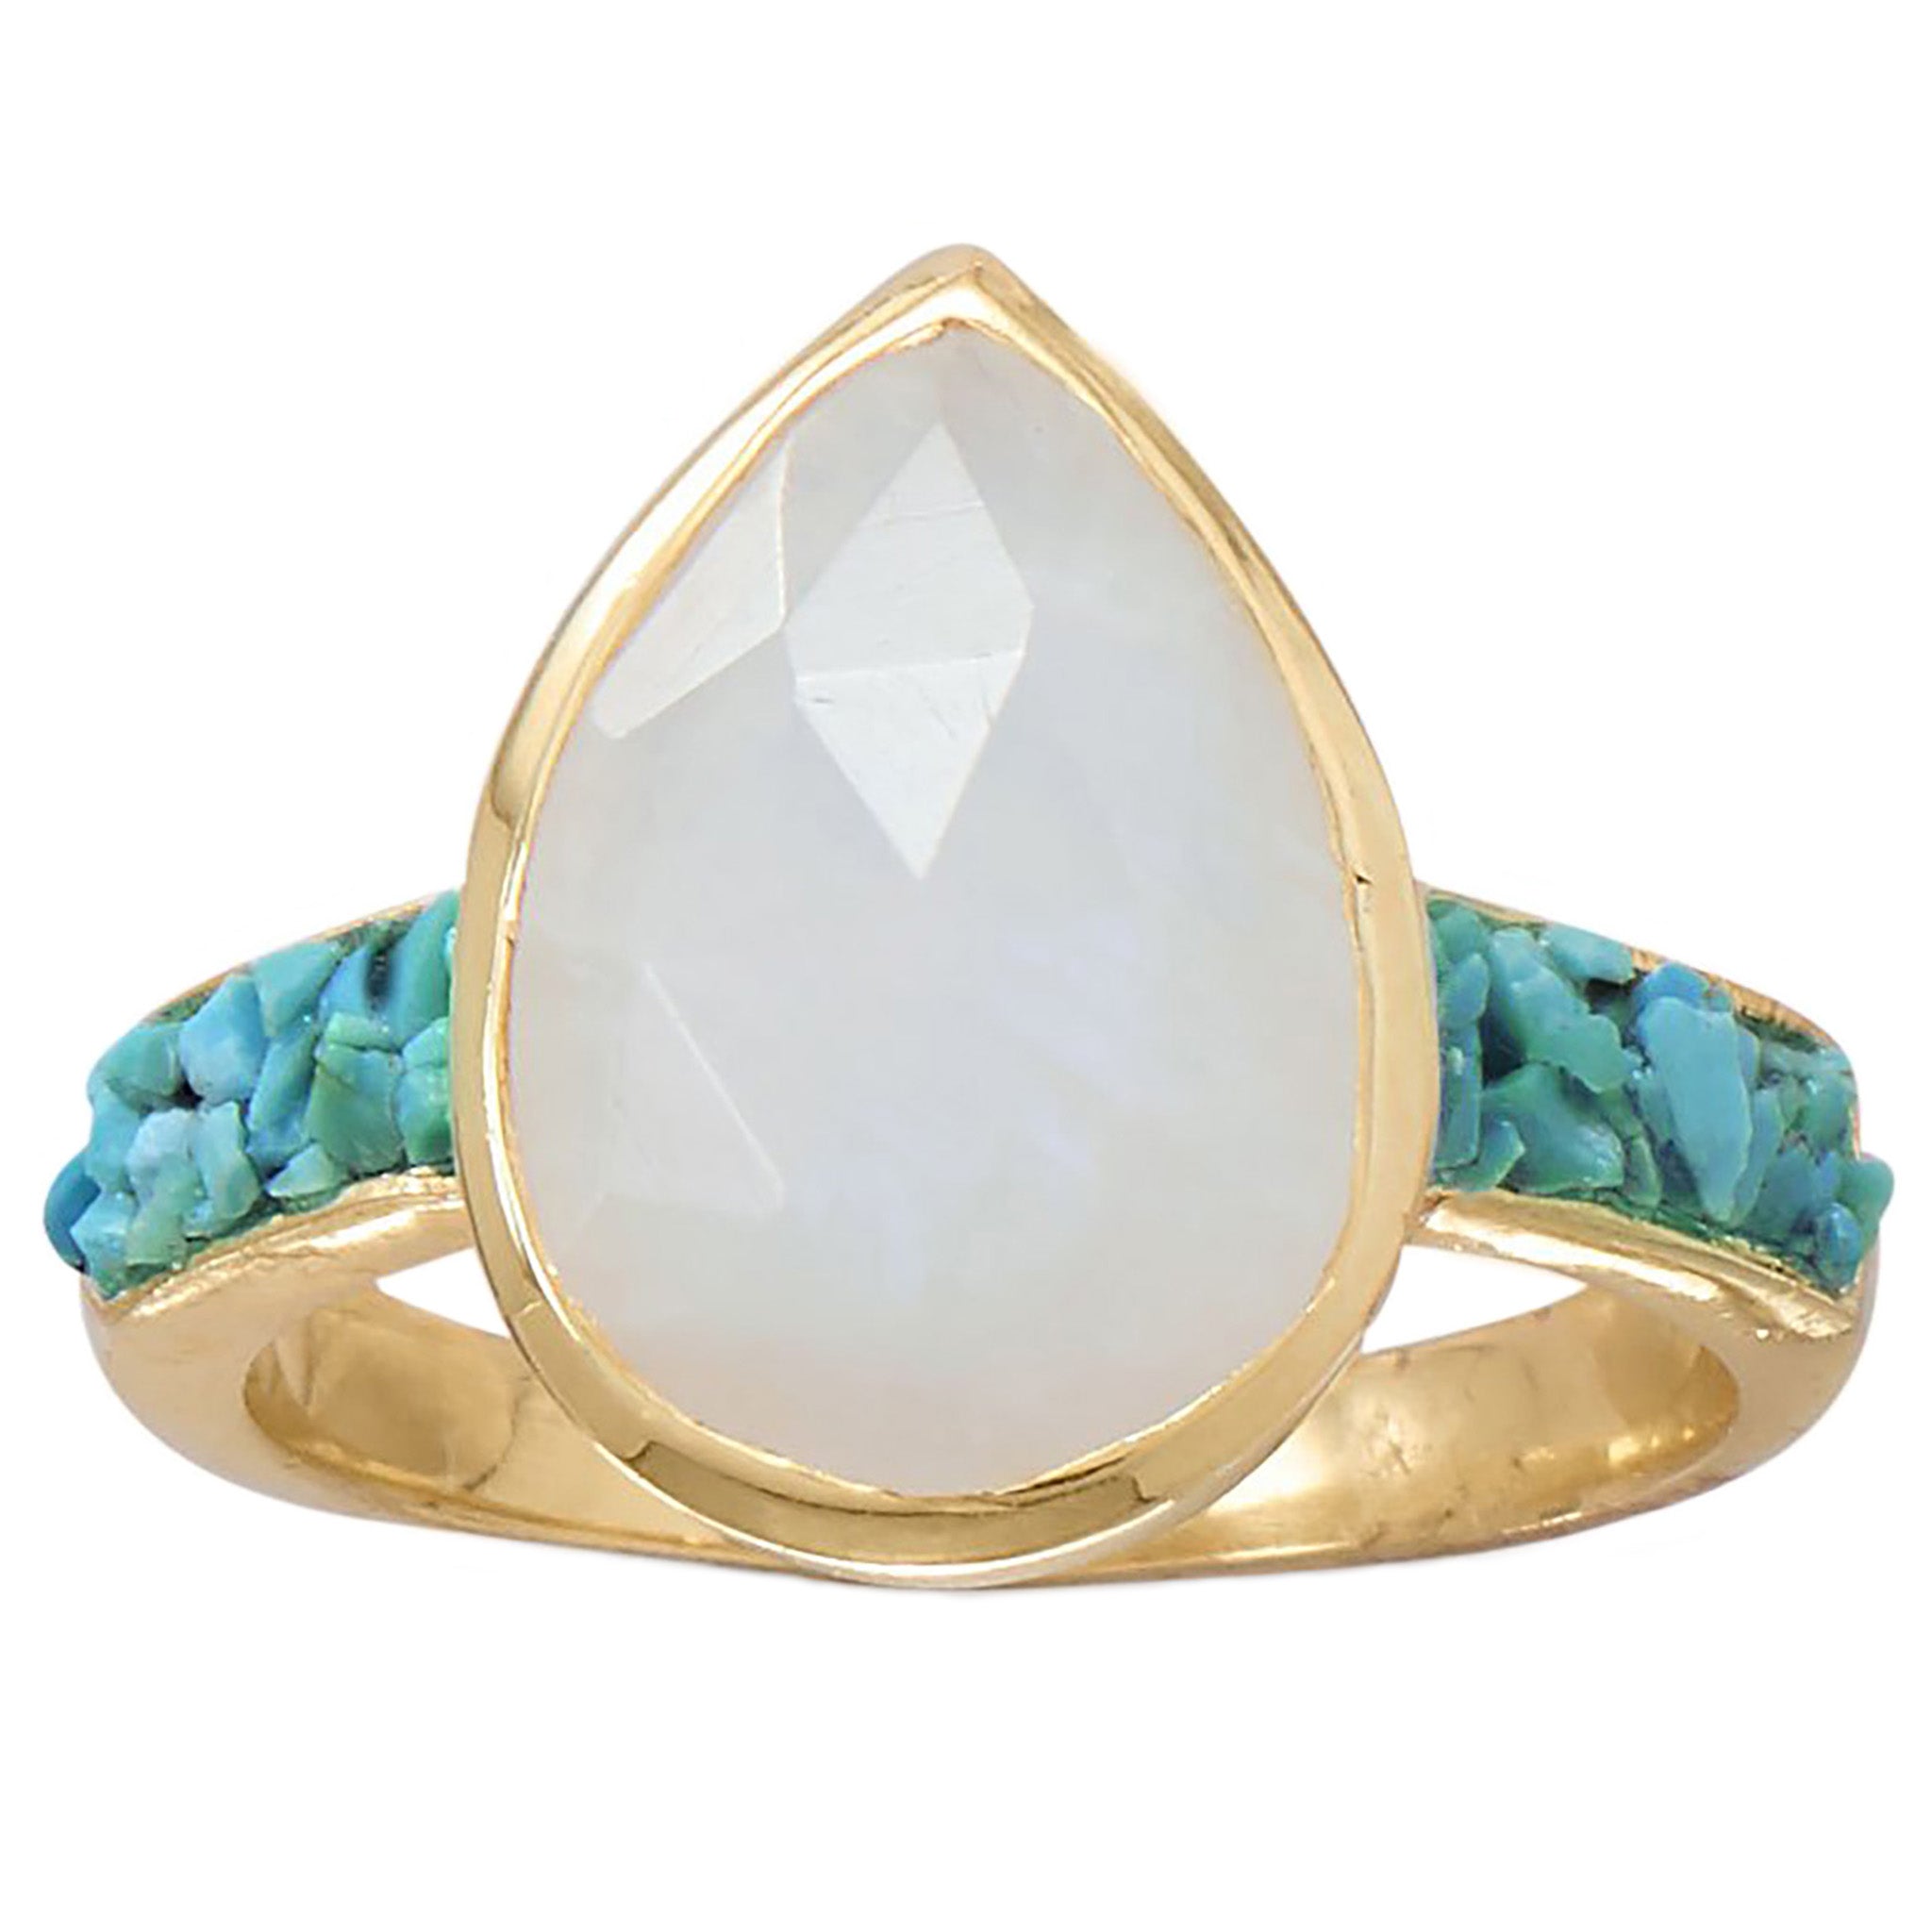 Rainbow Moonstone with Crushed Turquoise Ring